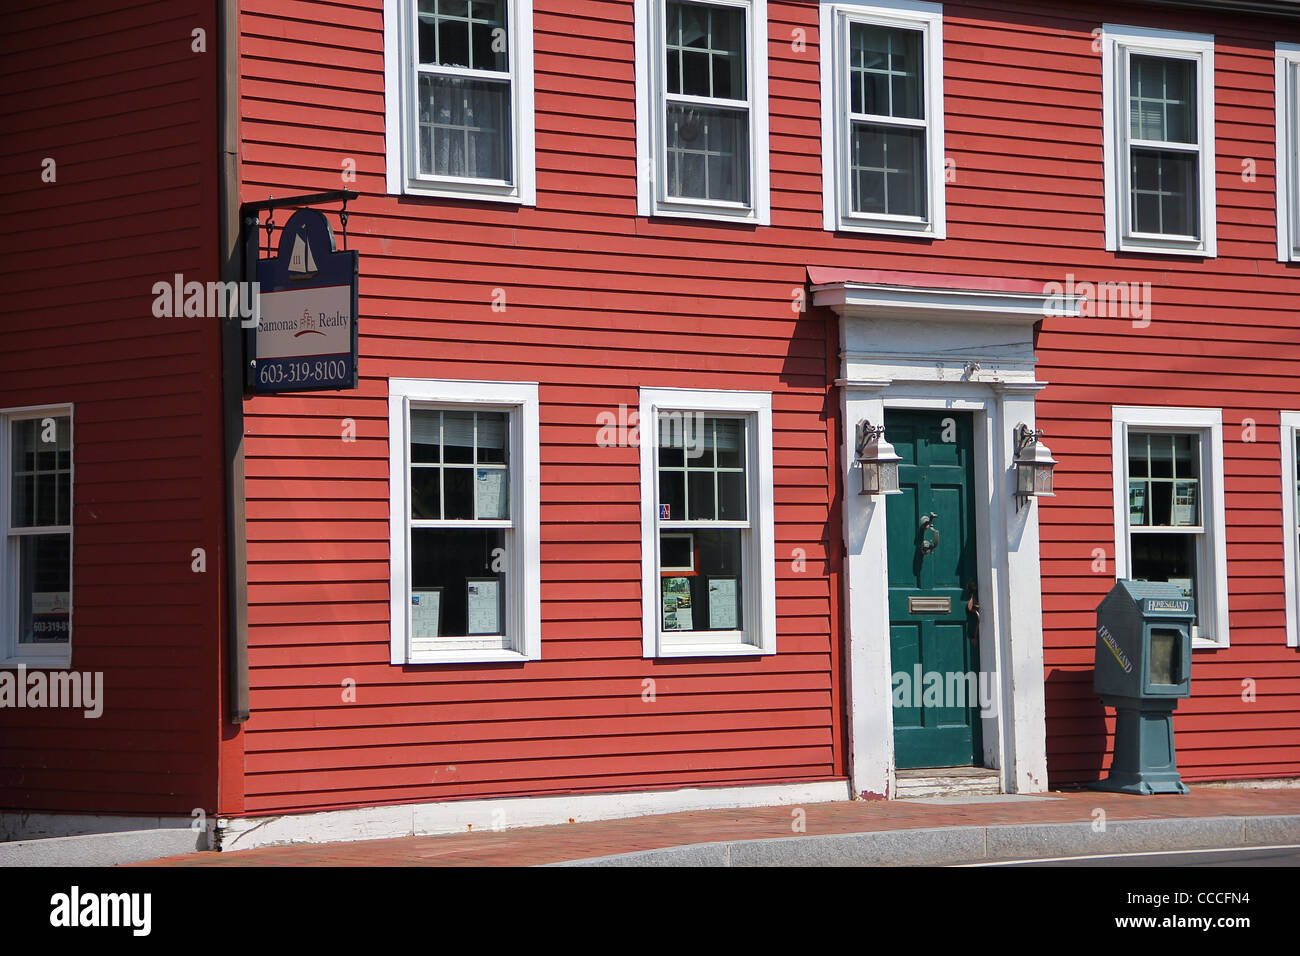 An old red building now housing a Real Estate business, in the historic town of Portsmouth, New Hampshire Stock Photo